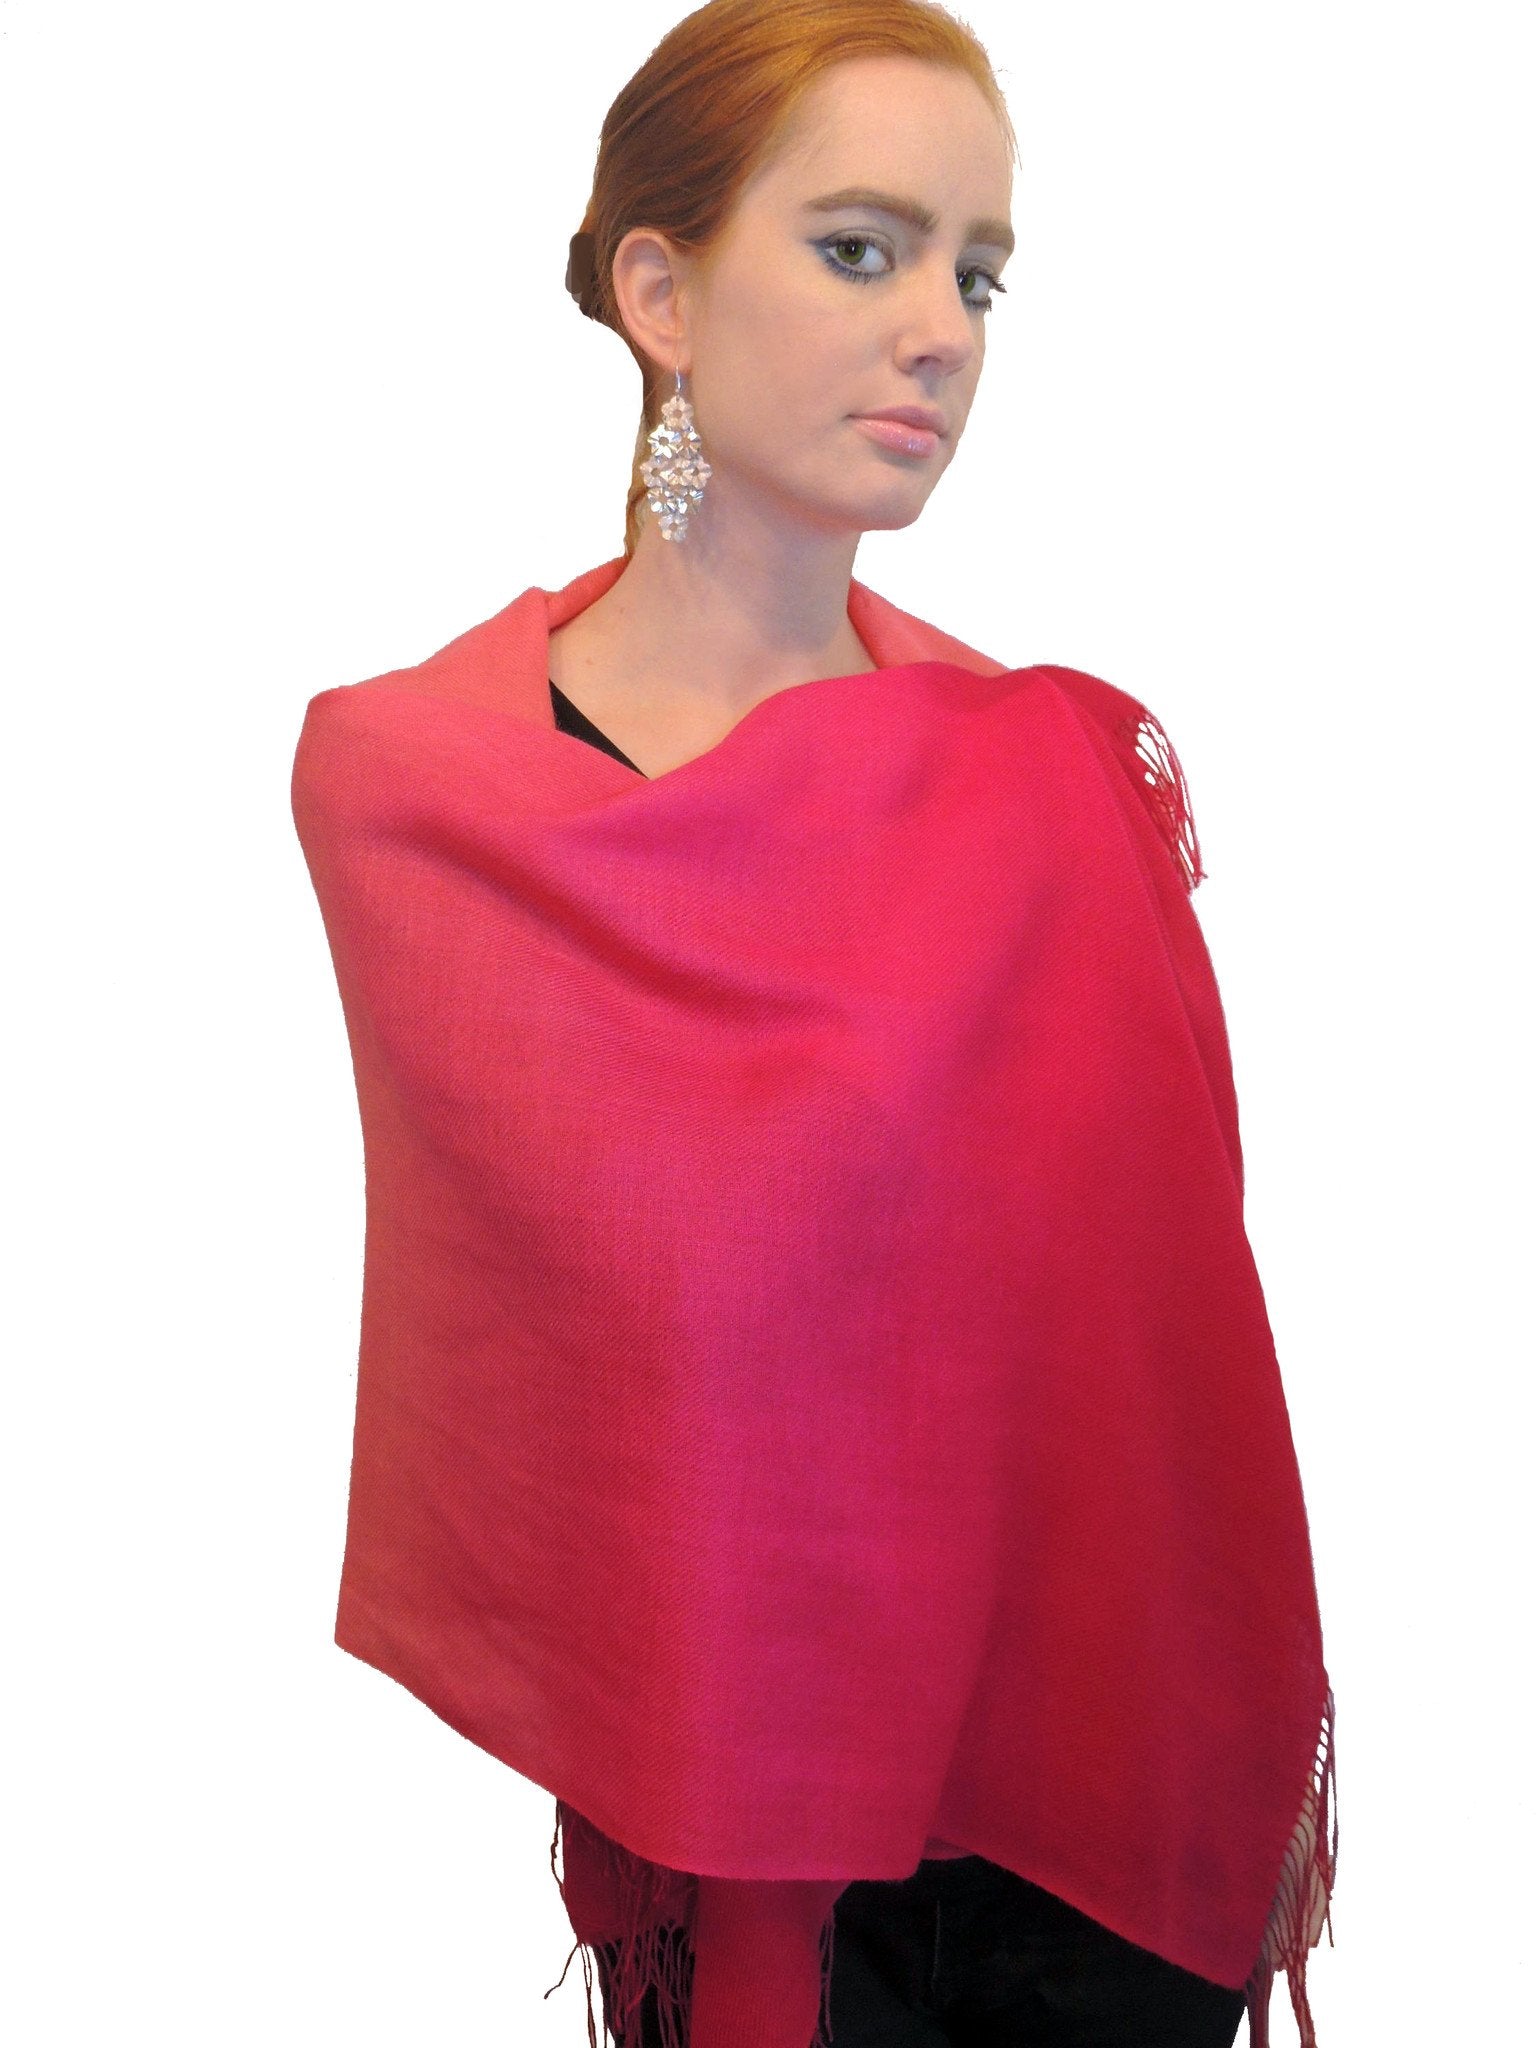 Baby Alpaca & Silk Shawl Two-toned Degrade - Dip Dyed in Coral - Qinti - The Peruvian Shop